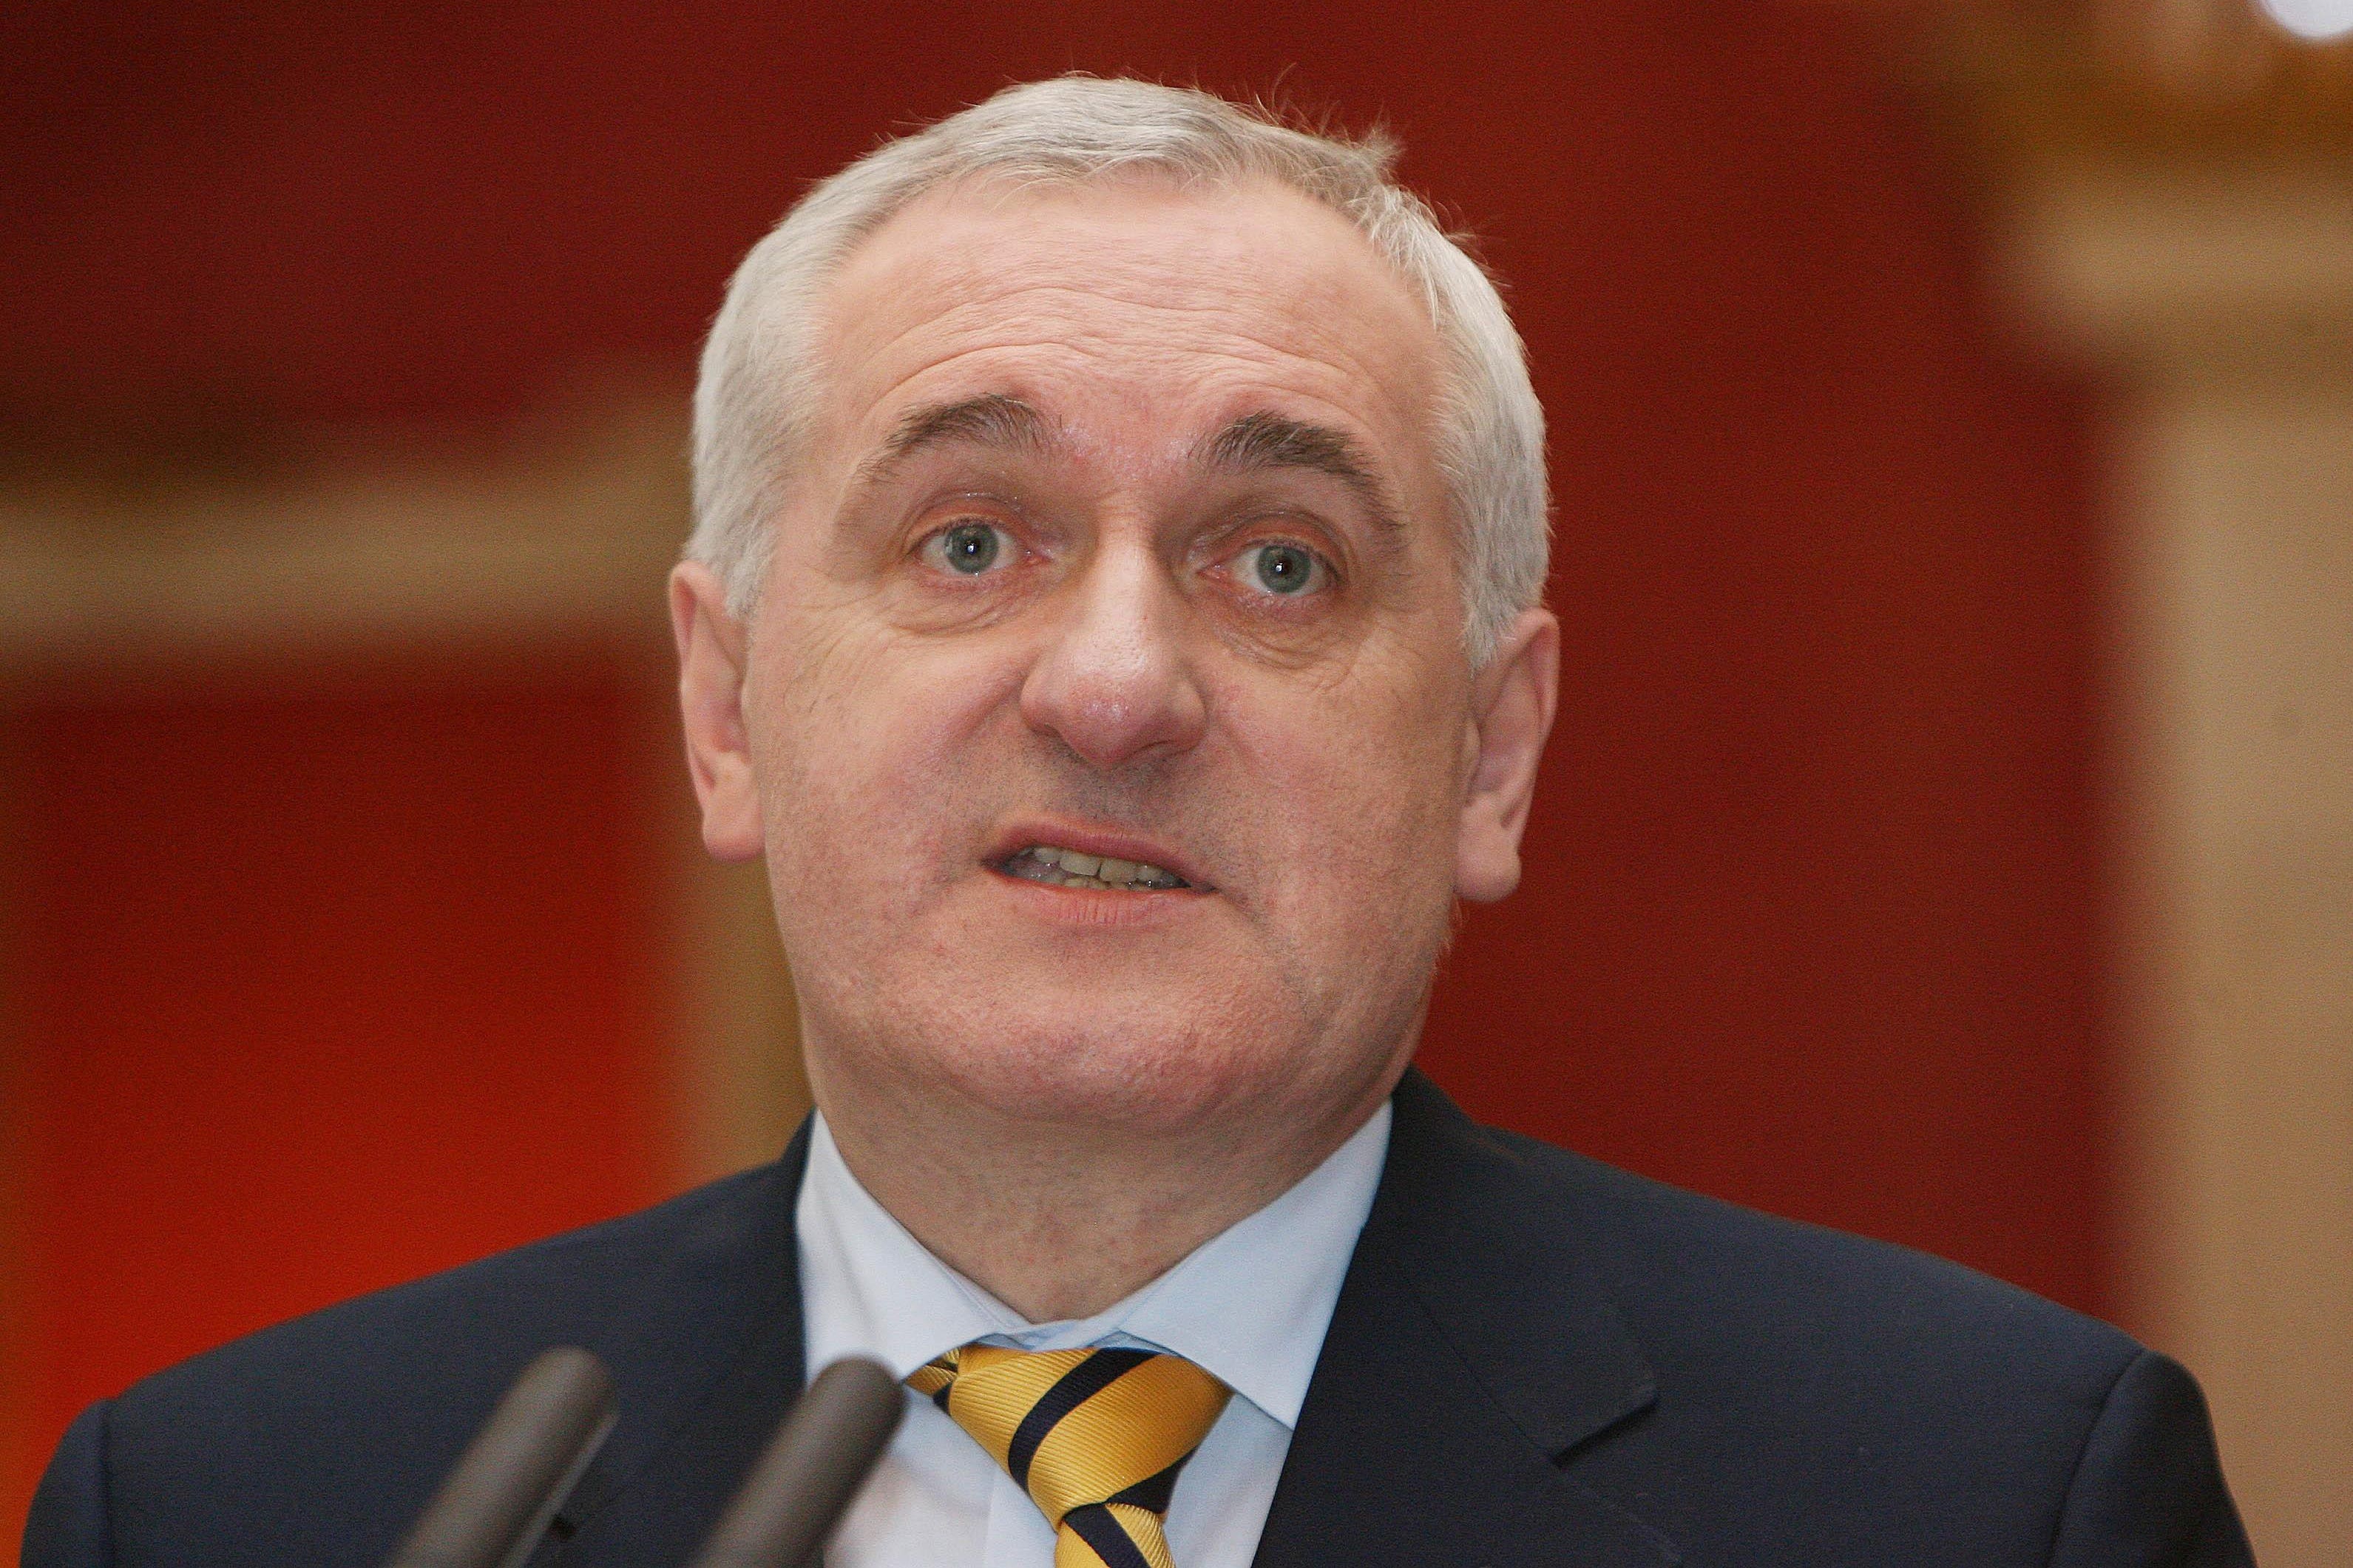 Bertie Ahern resigned from Fianna Fail in 2012 (Niall Carson/PA)